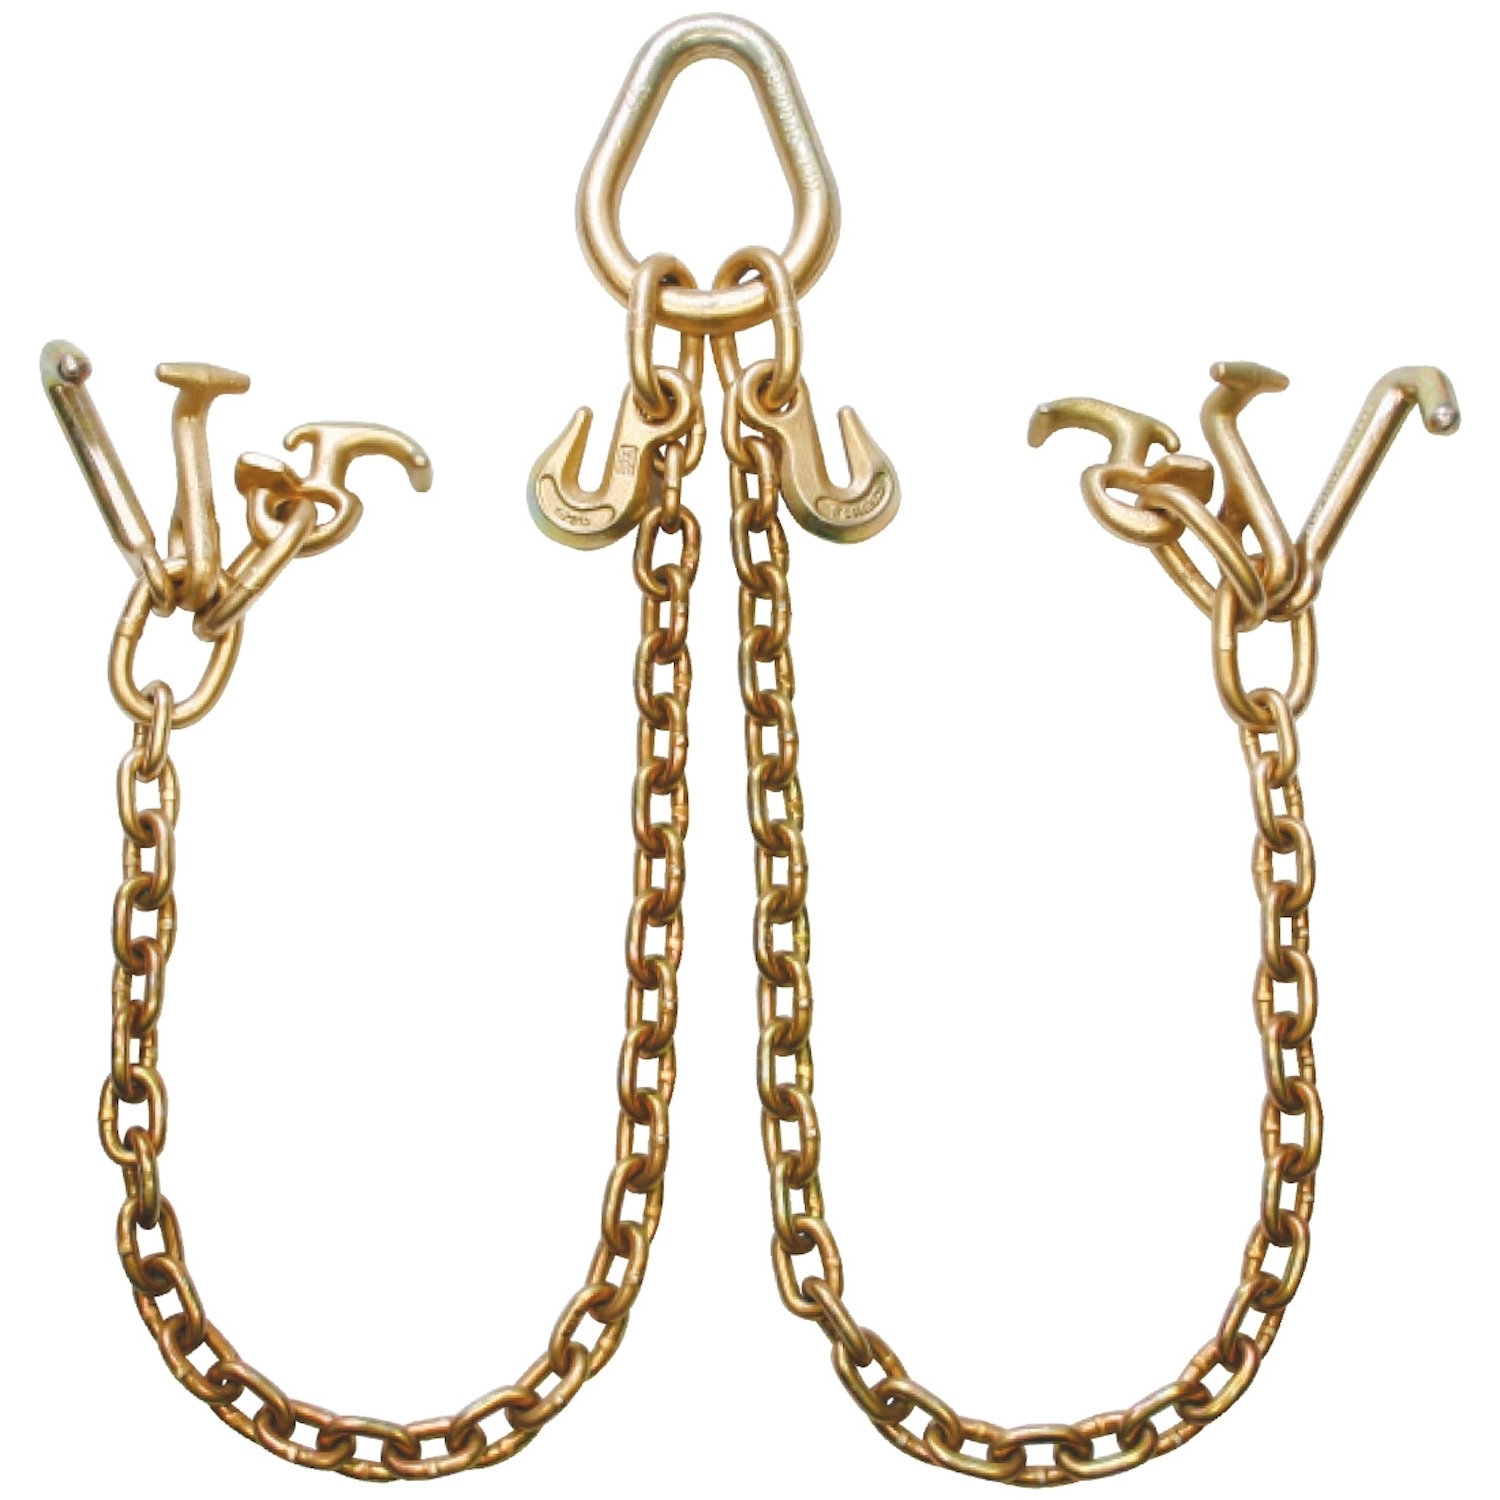 Universal Grade 70 Chain Bridle with RTJ Hooks